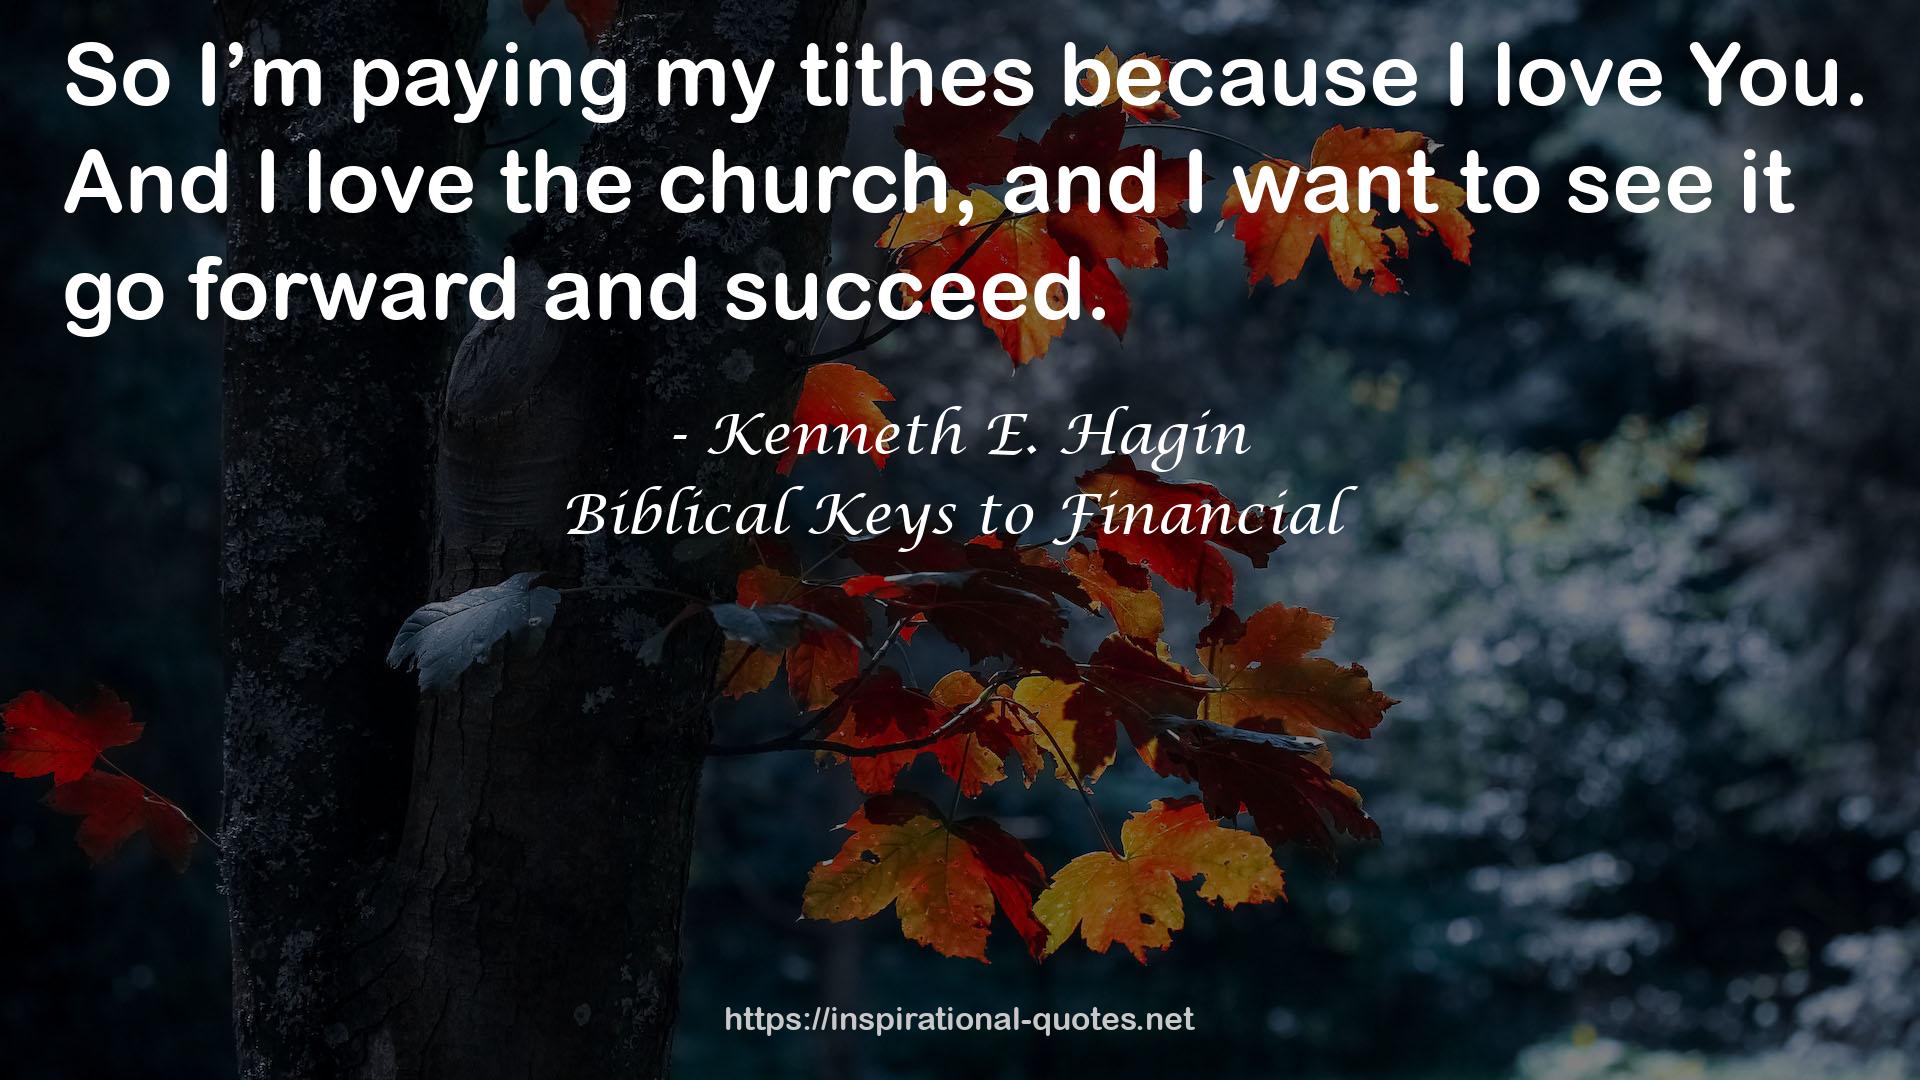 Biblical Keys to Financial QUOTES